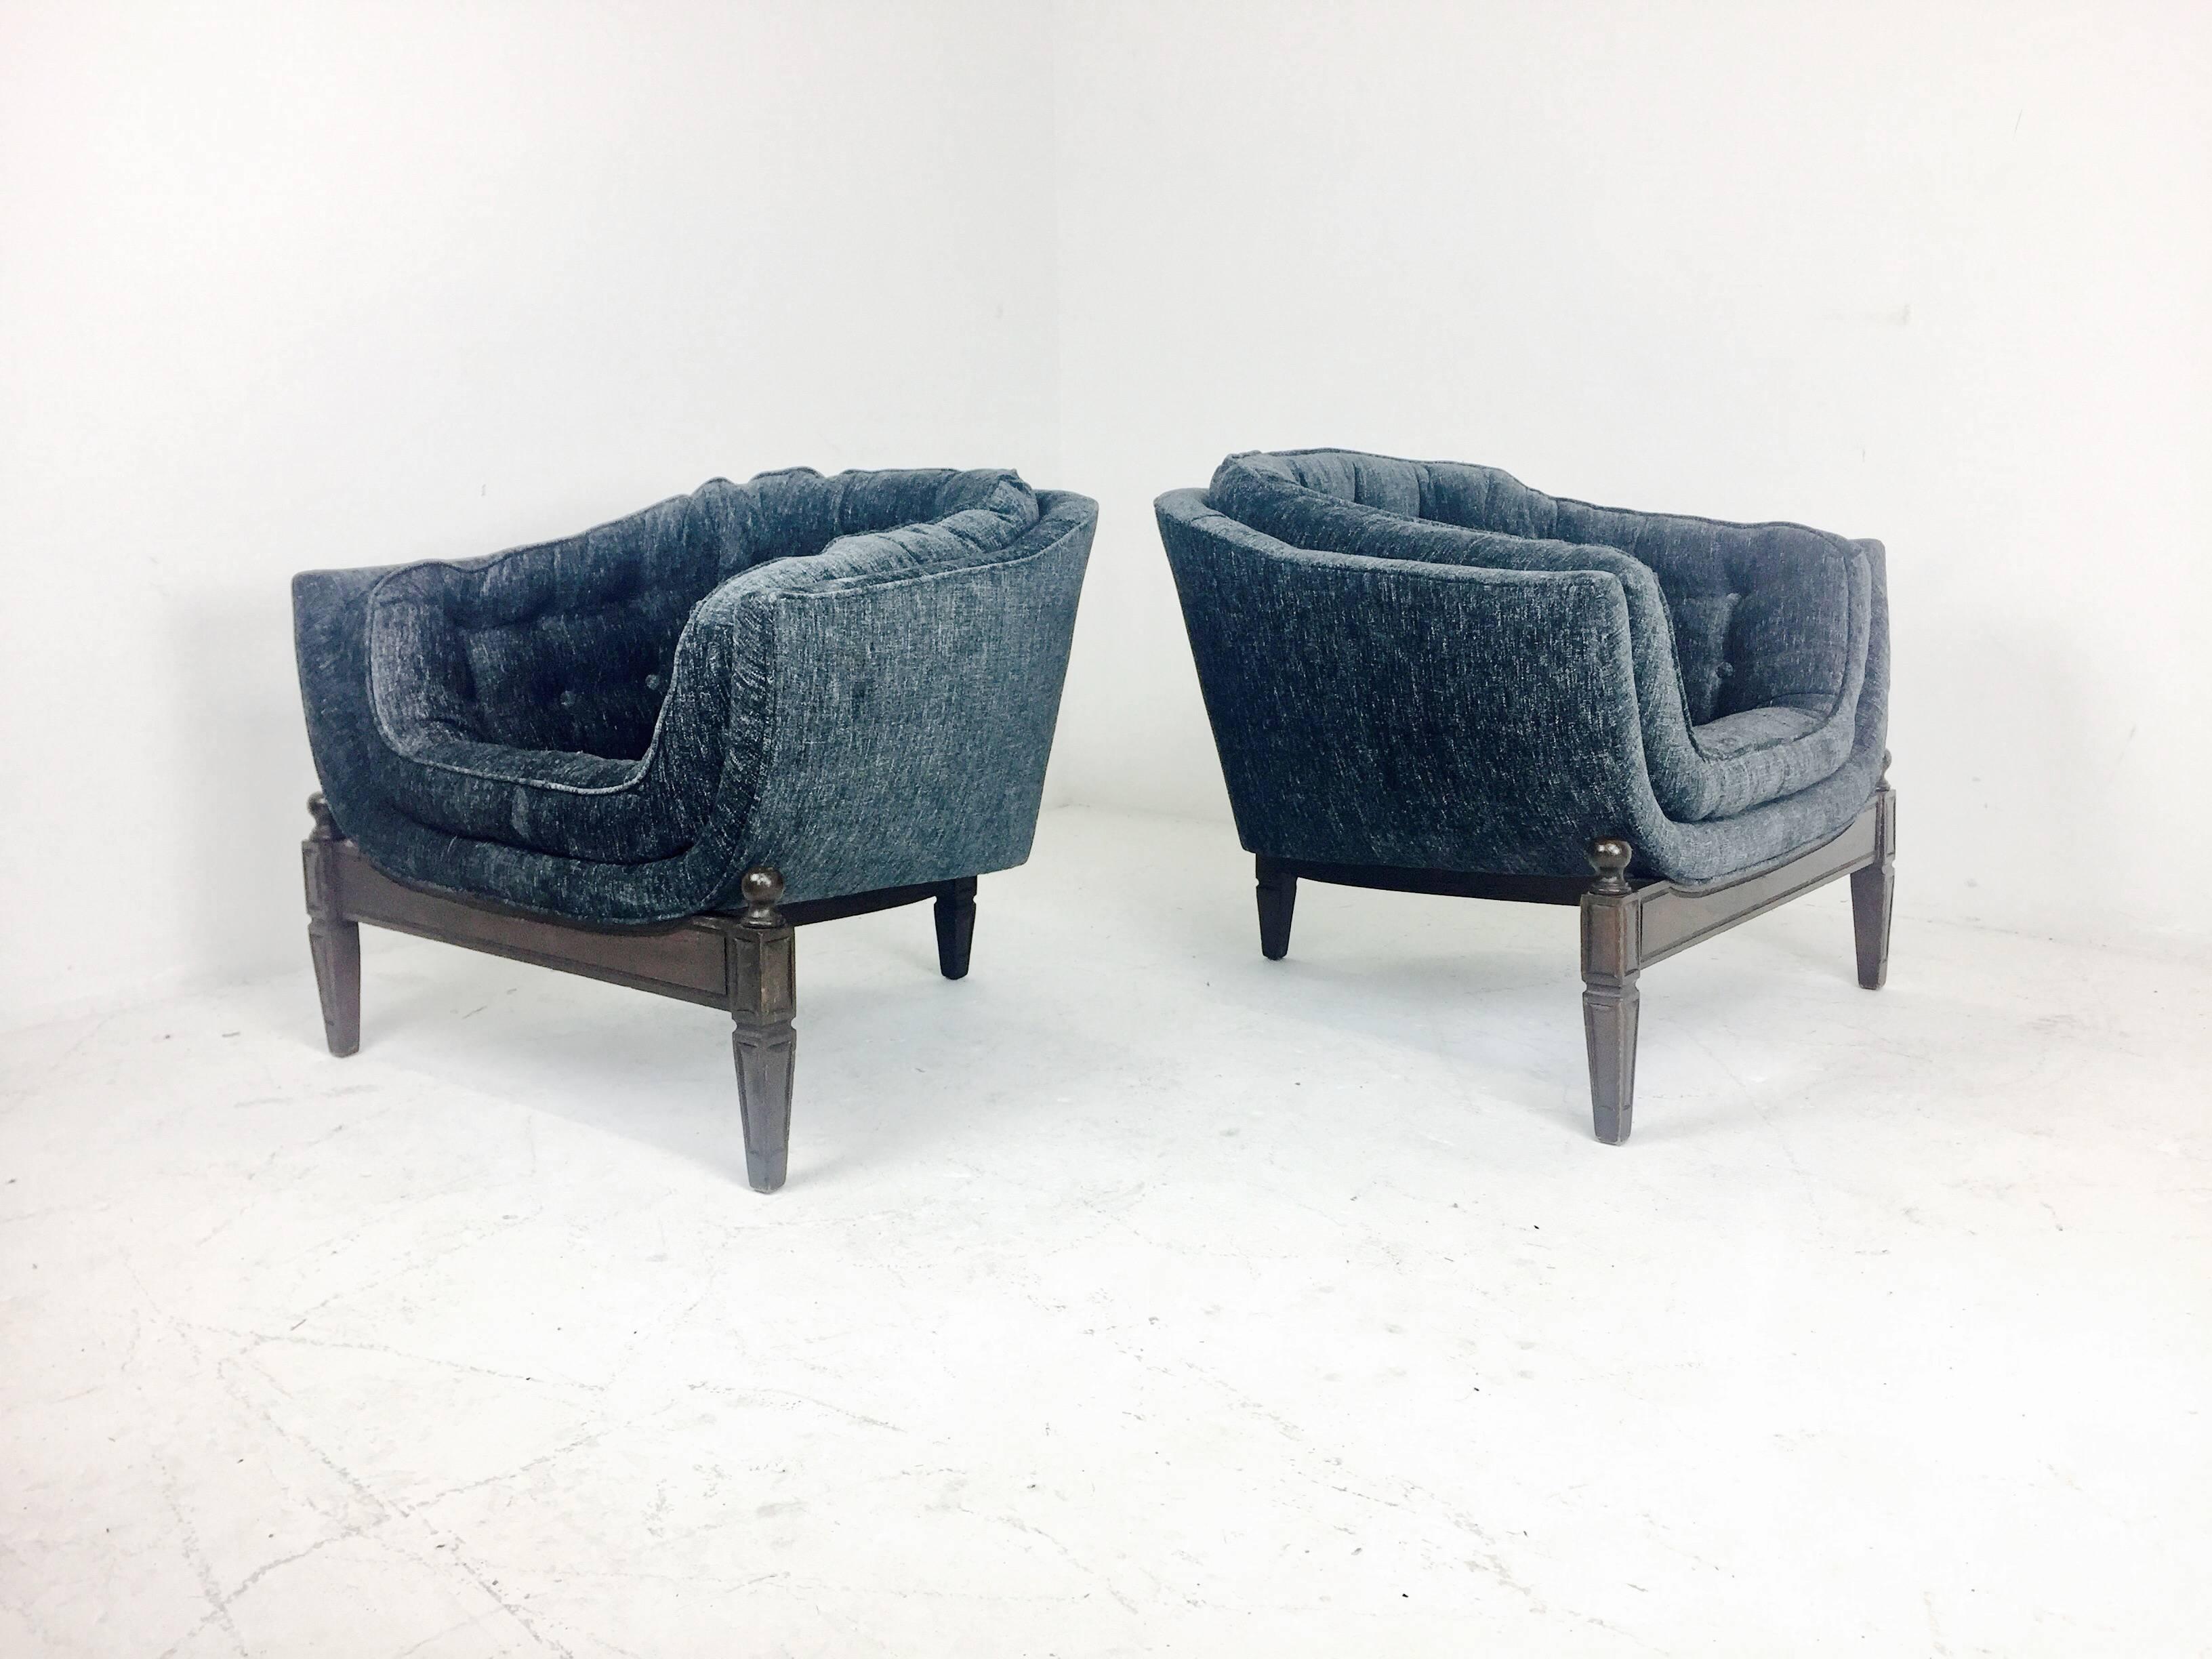 Pair of low tufted three legged lounge chairs in the style of Adrain Pearsall. Newly upholstered, circa 1960s.

Dimensions: 29" W x 30" D x 25" T.
seat height 15".